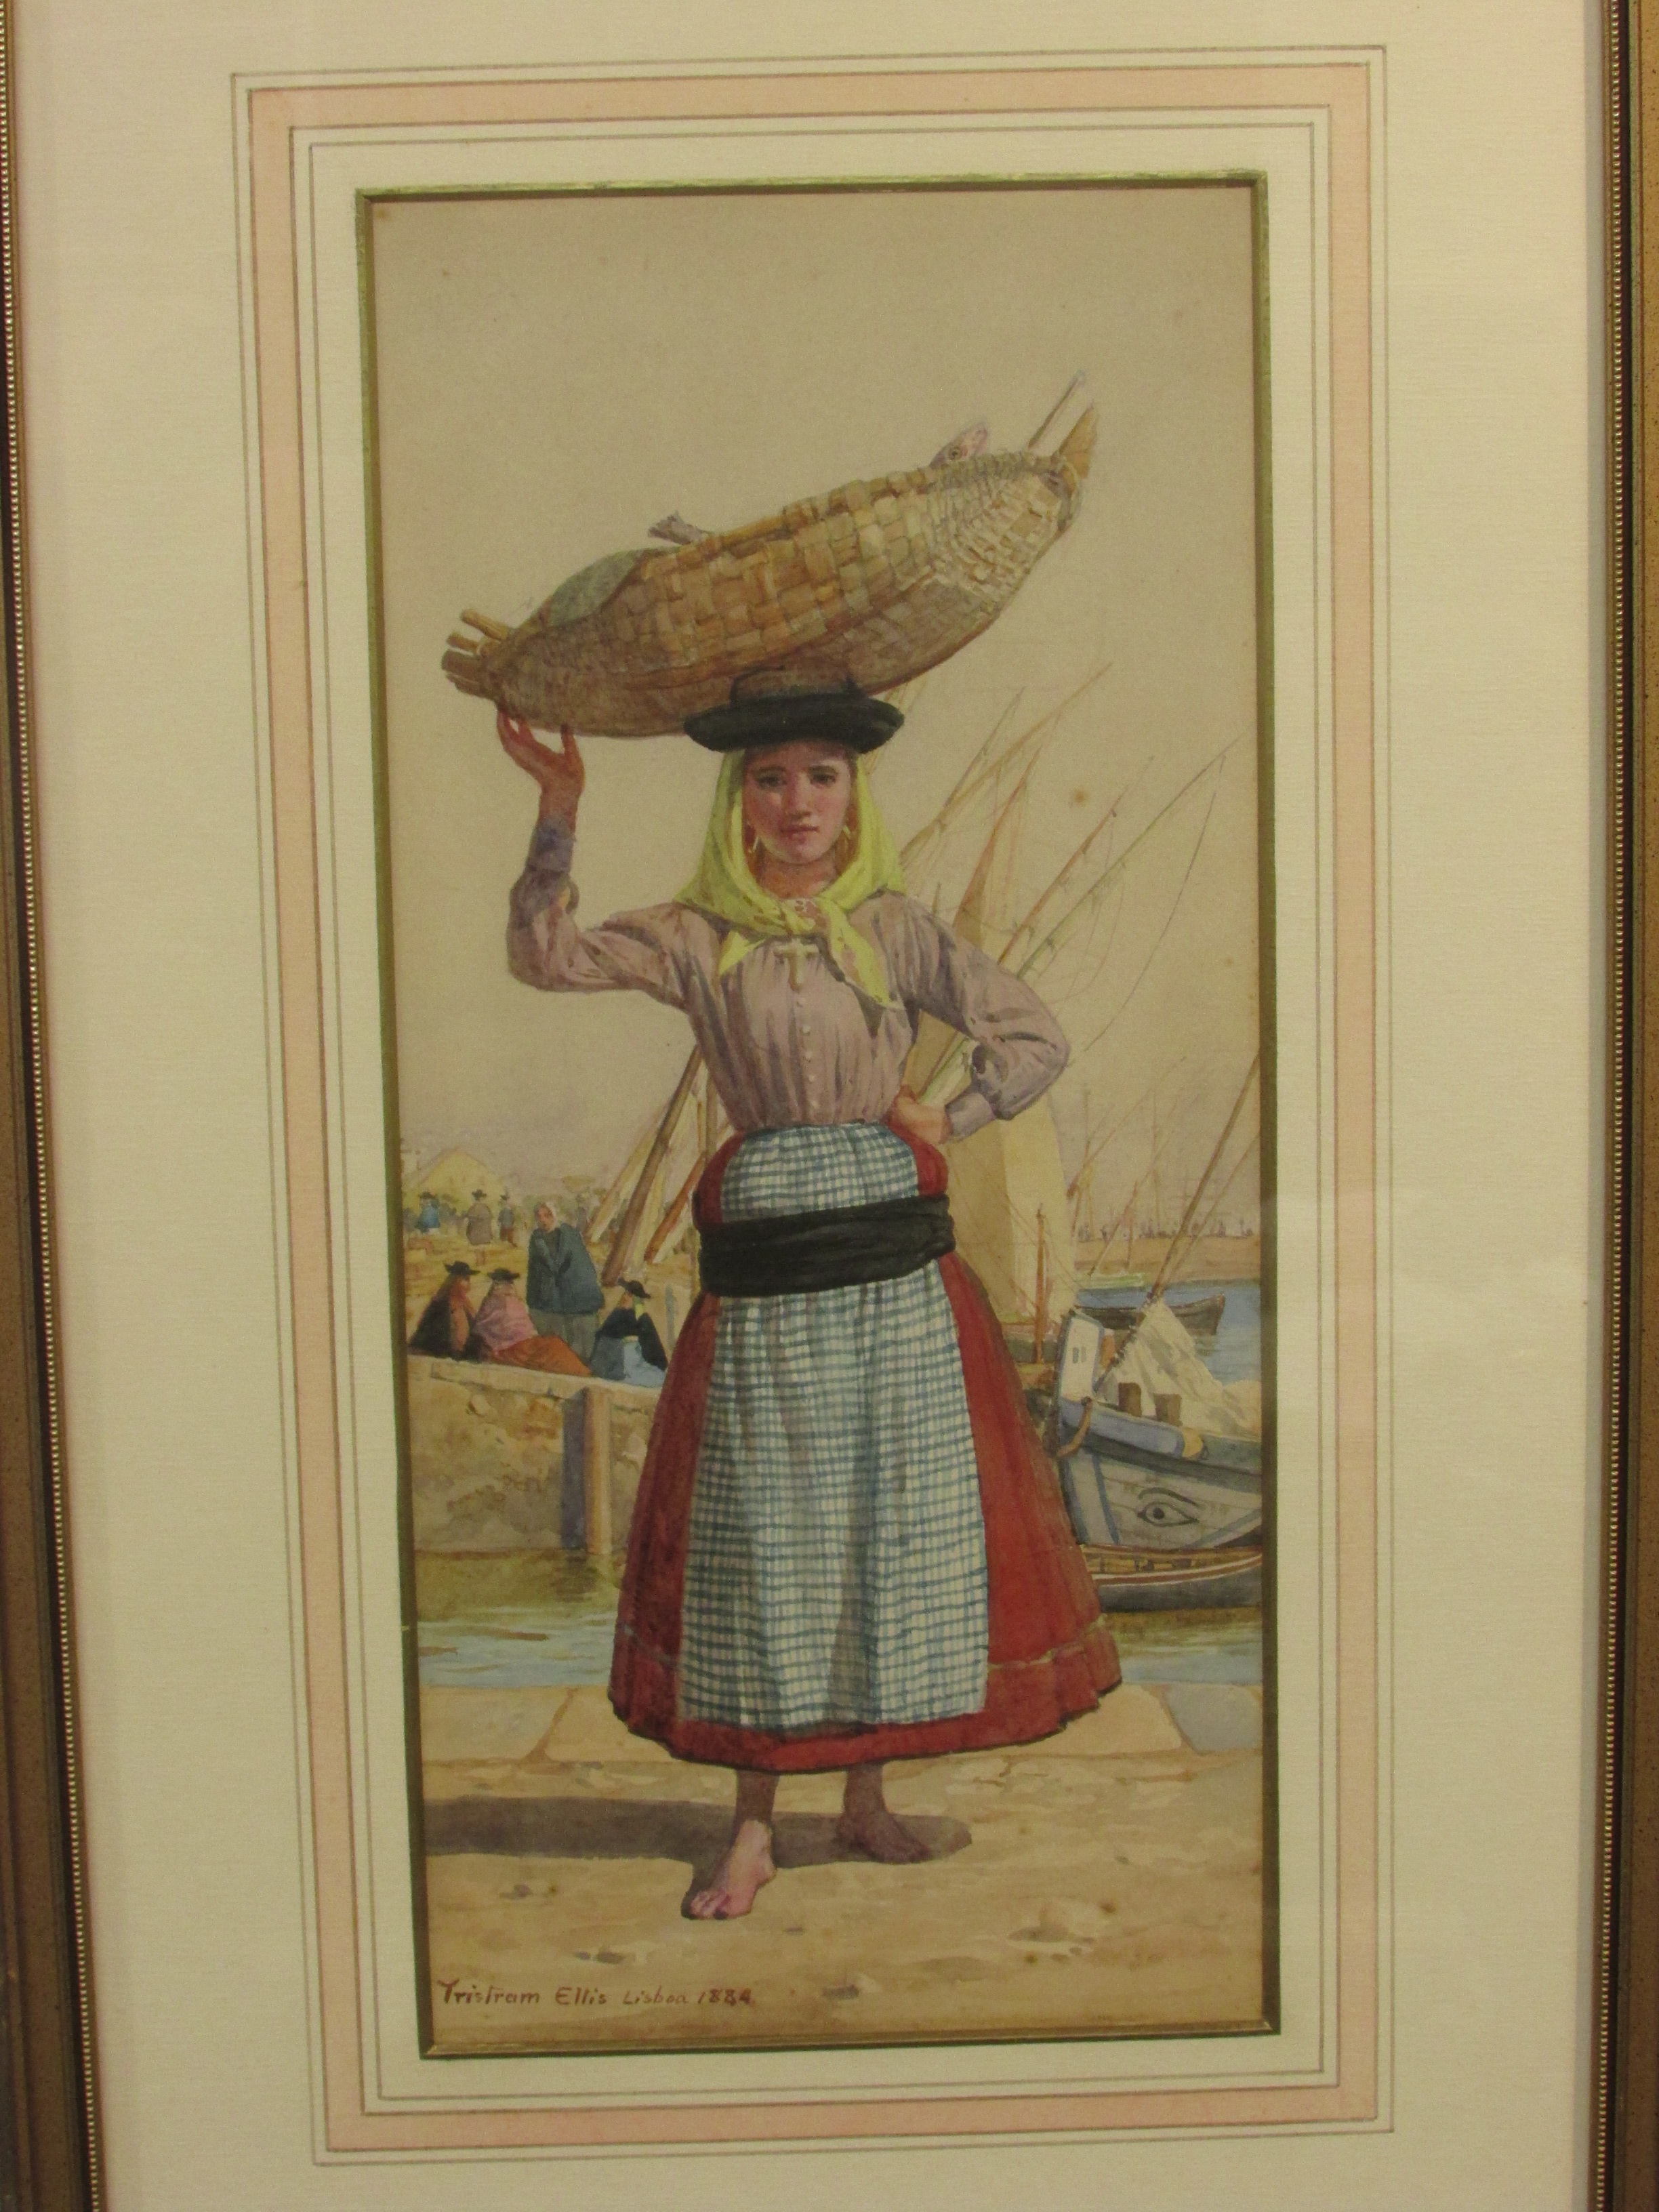 Tristram Ellis LISBON 1884, watercolour of fish seller with basket barefooted in harbour scene, - Image 5 of 5